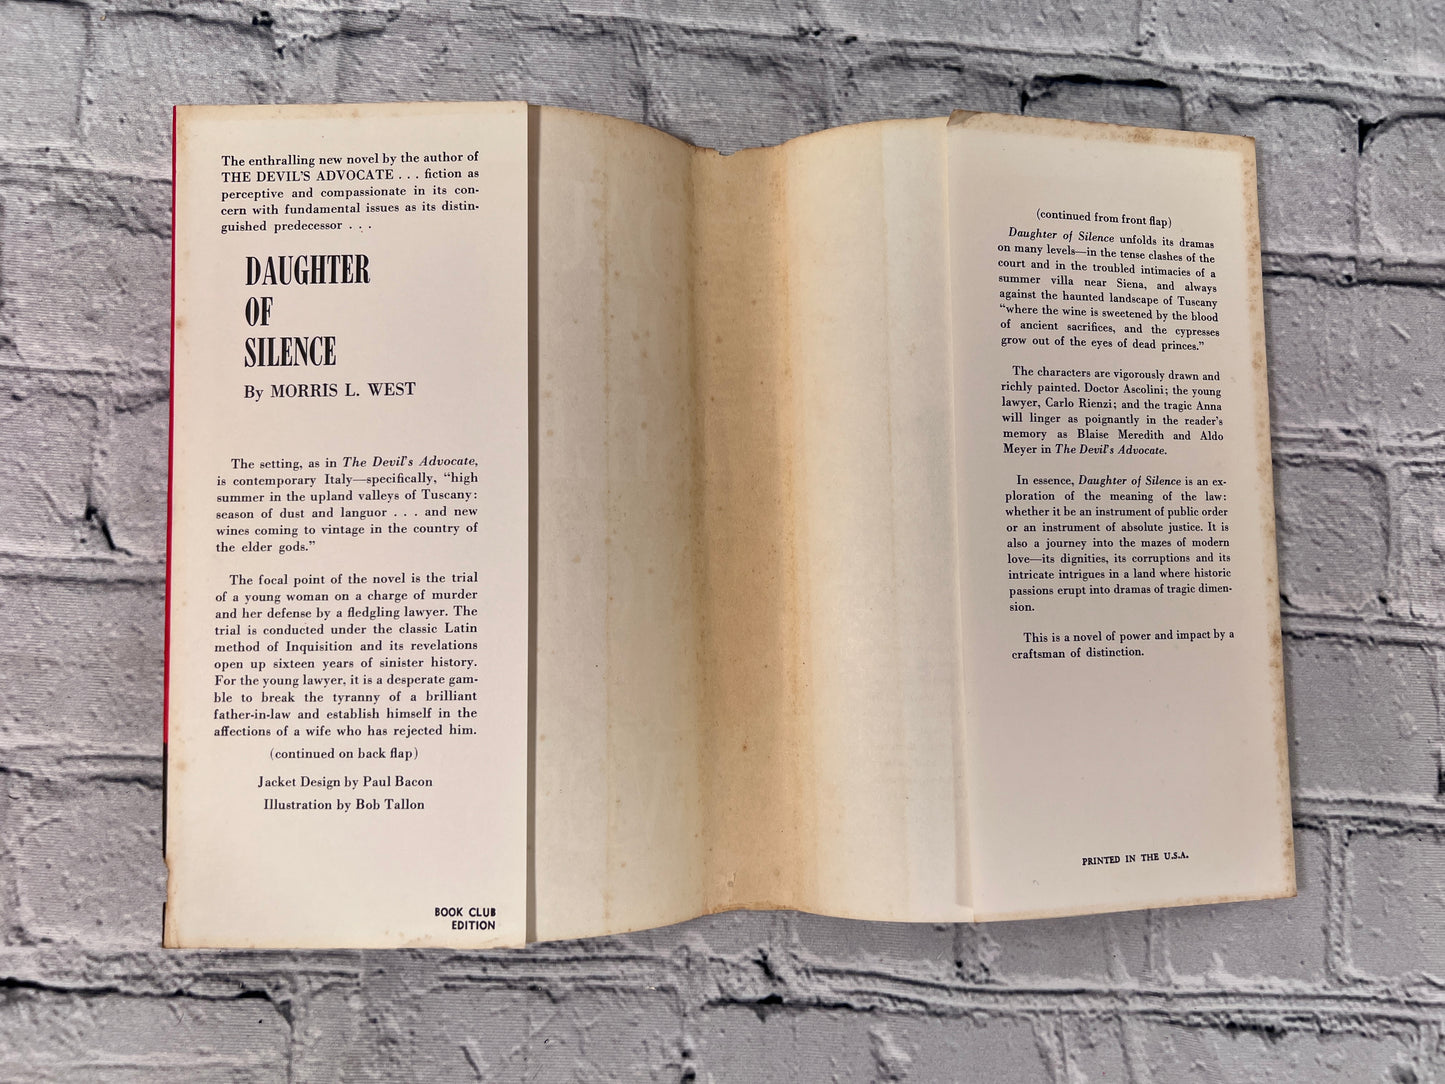 Daughter of Silence by Morris L. West [1961]